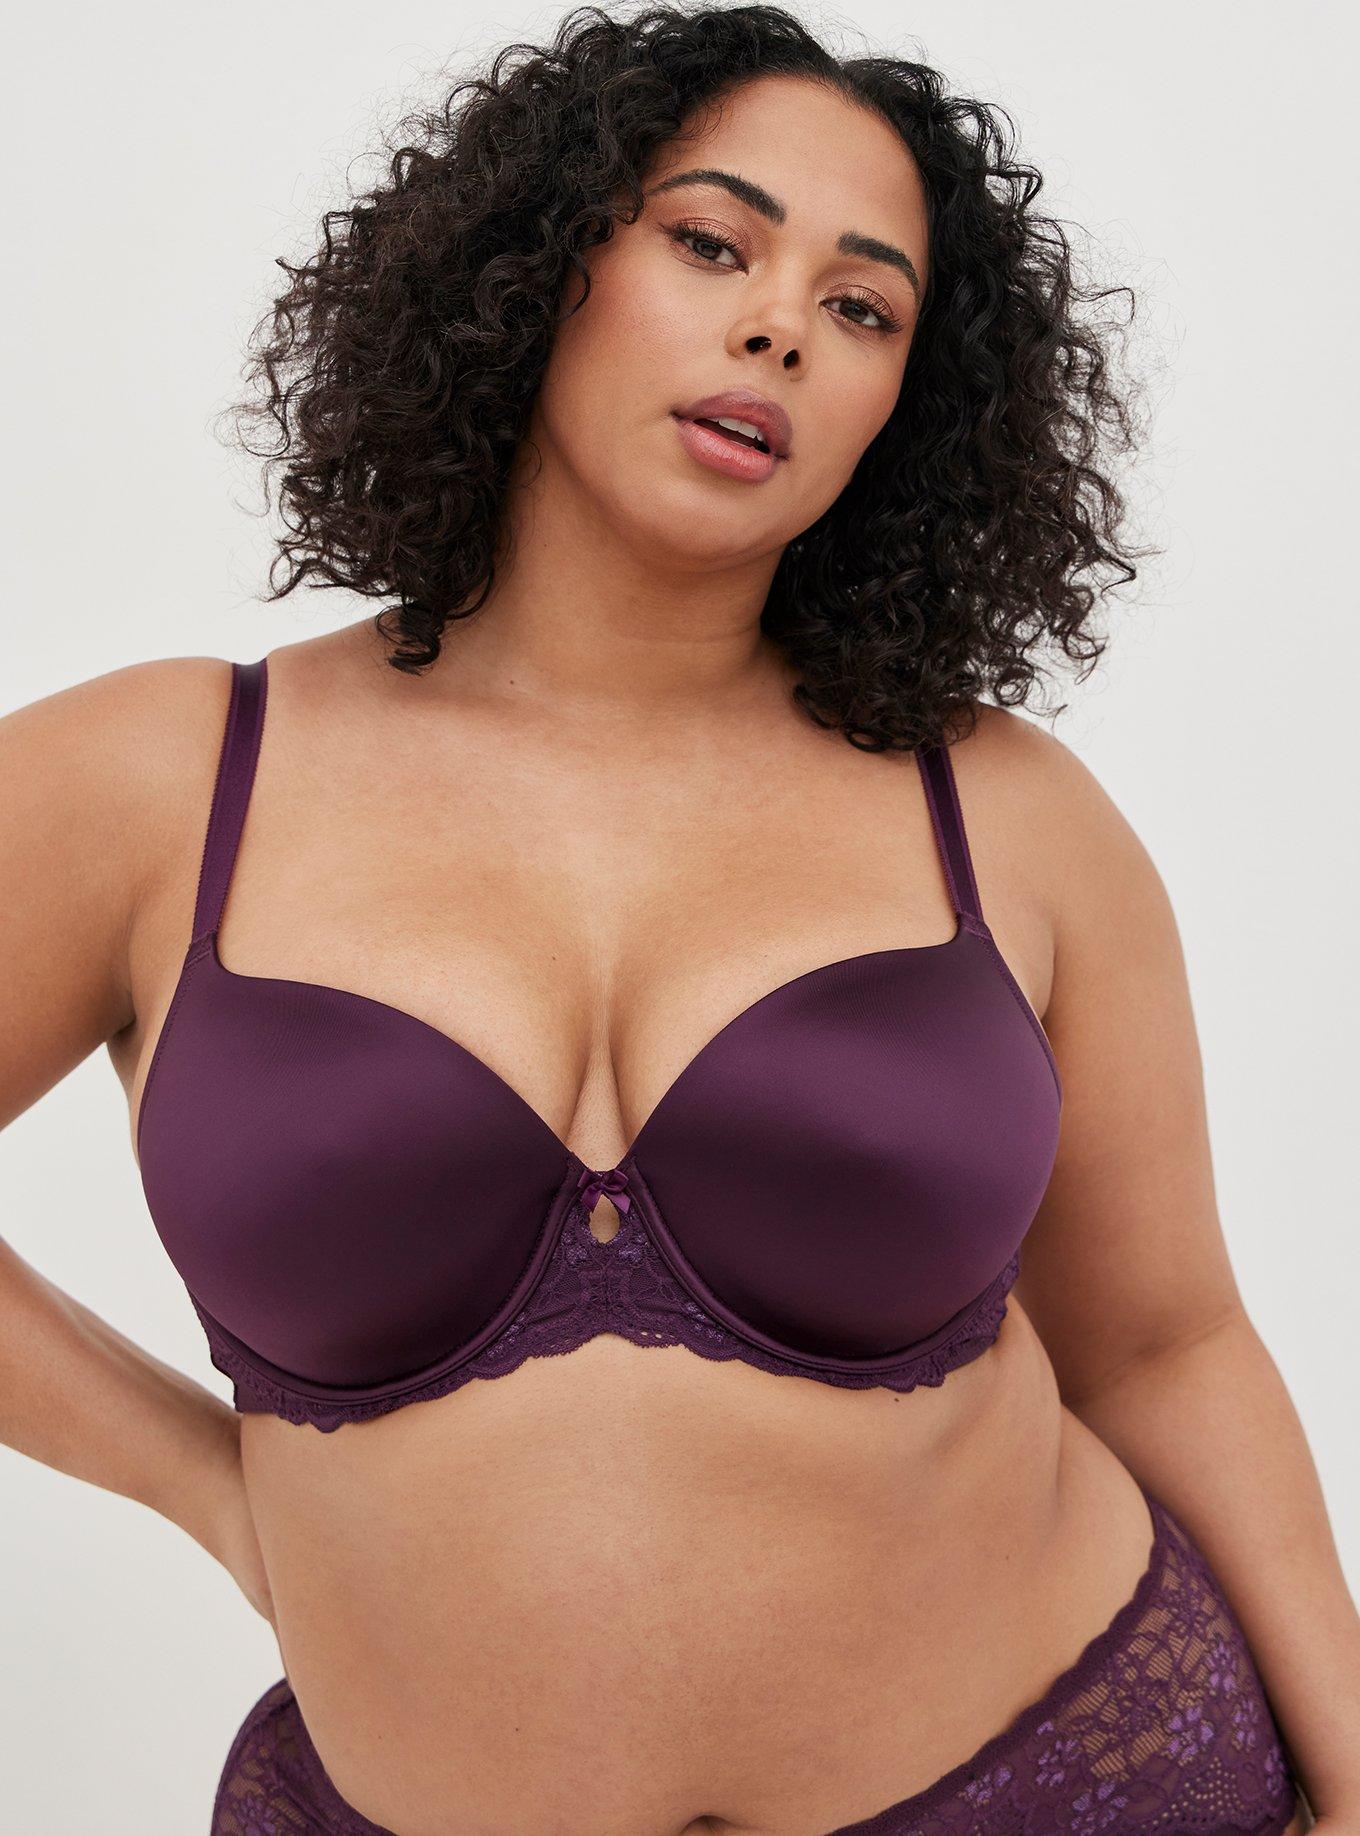 Torrid Black Curve Lightly Padded 40F Bra Size undefined - $26 - From Tiera